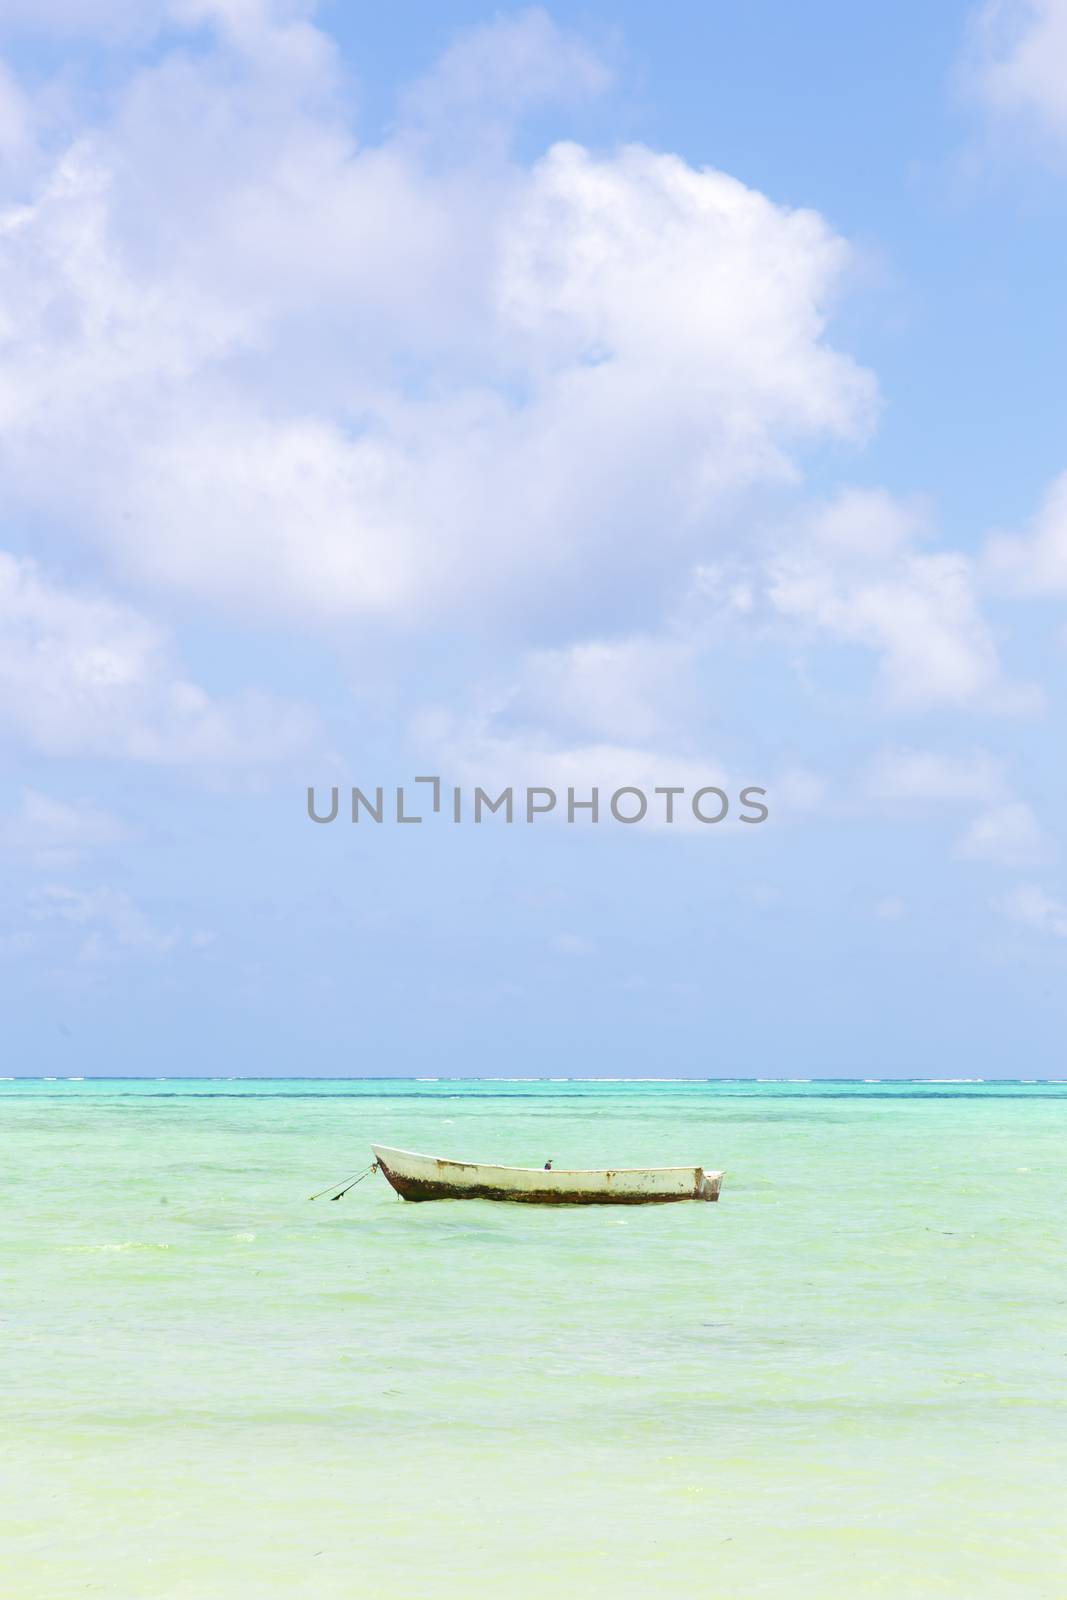 Solitary fishing boat on picture perfect white sandy beach with turquoise blue sea, Paje, Zanzibar, Tanzania. Copy space.